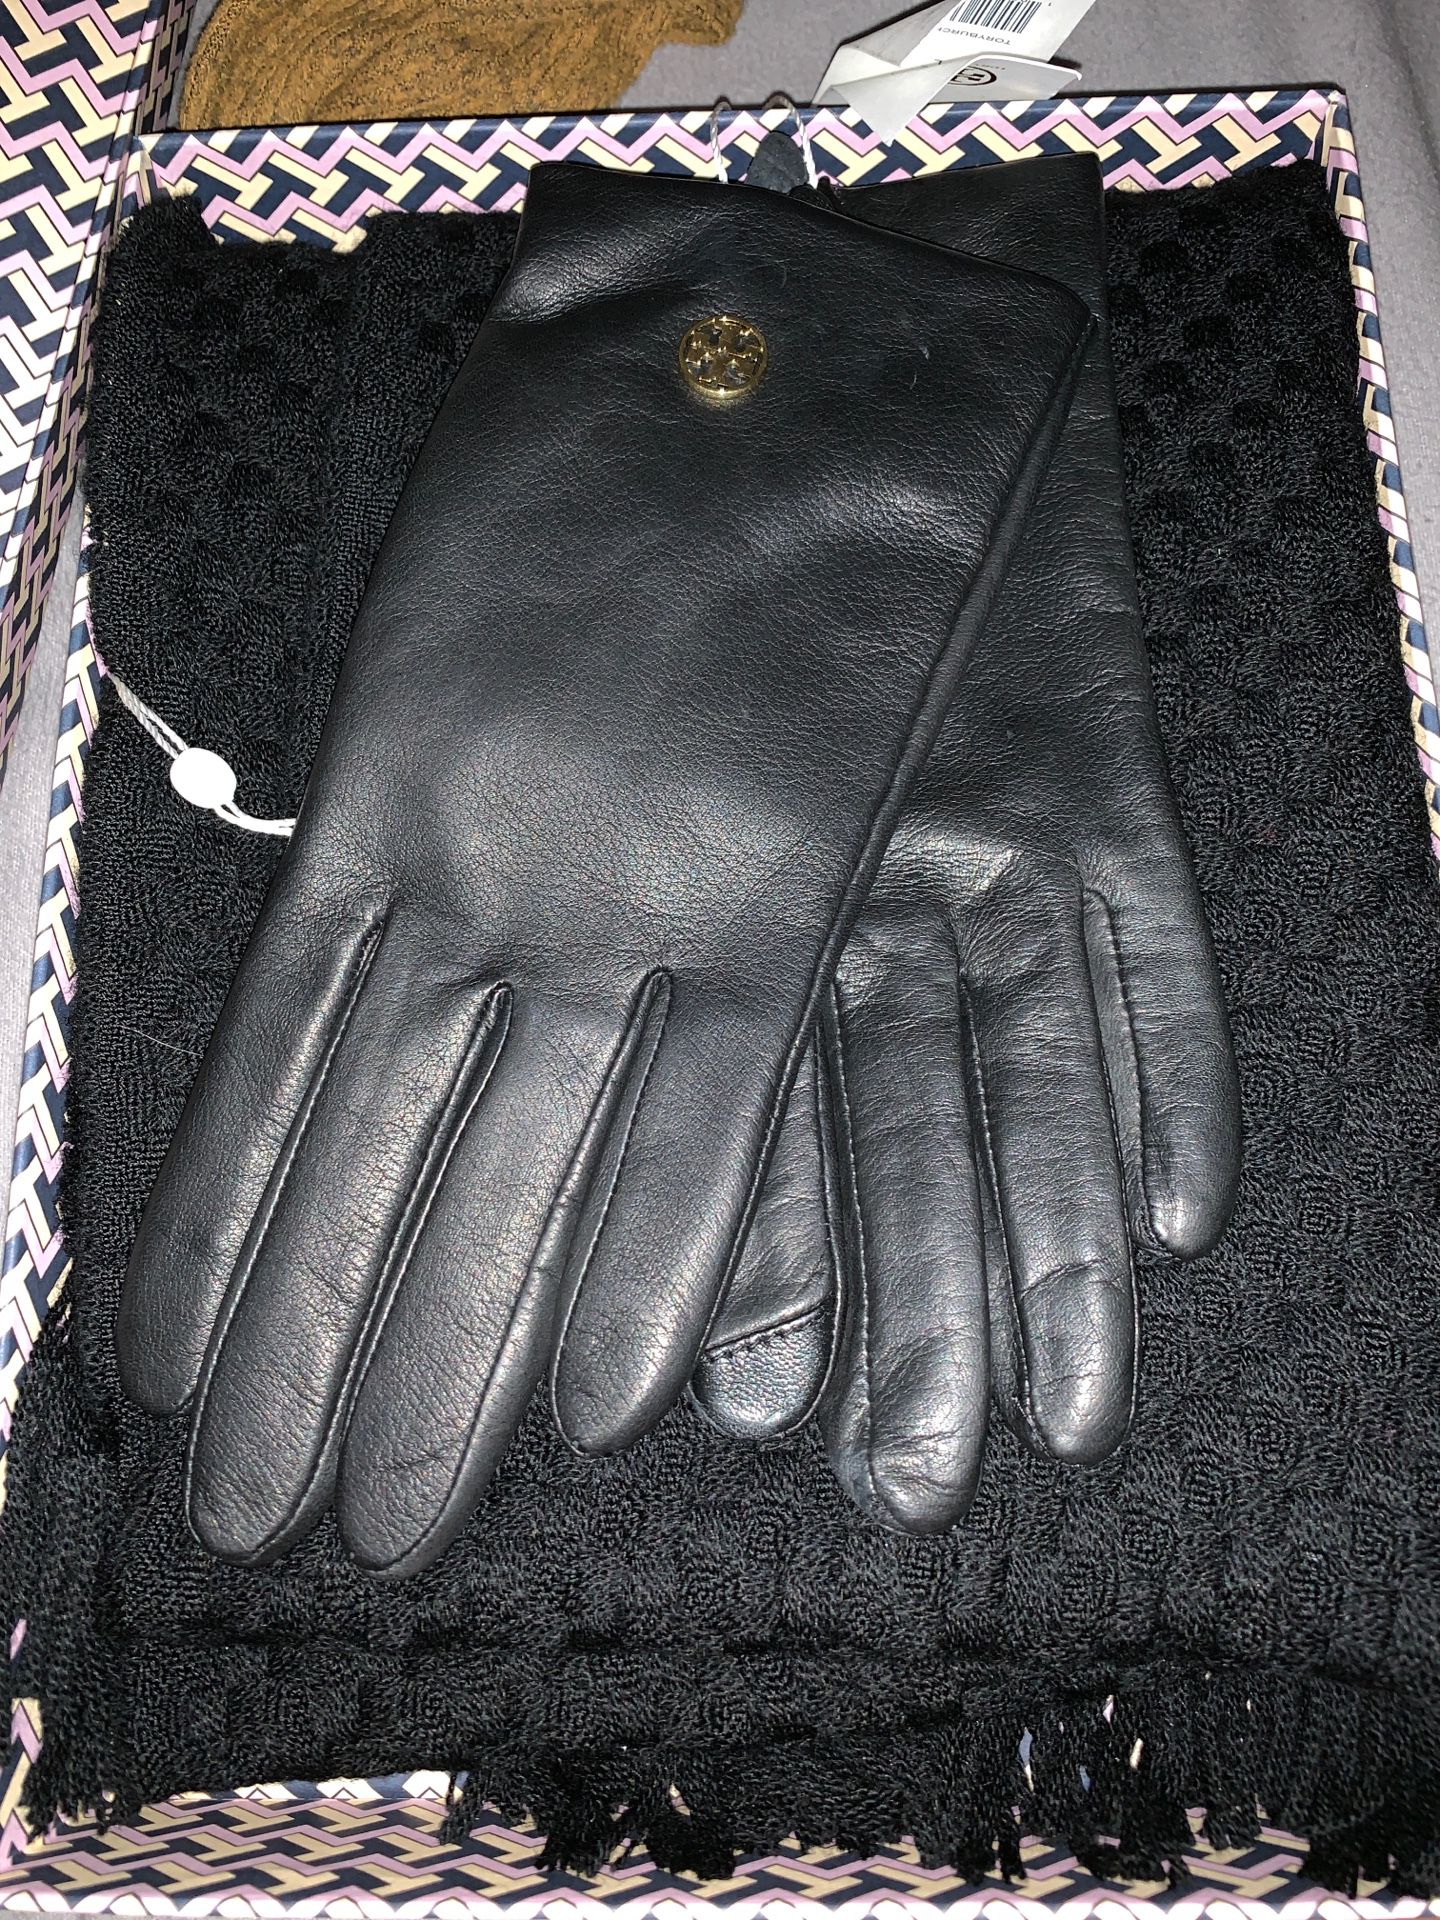 Tory Burch scarf and glove set